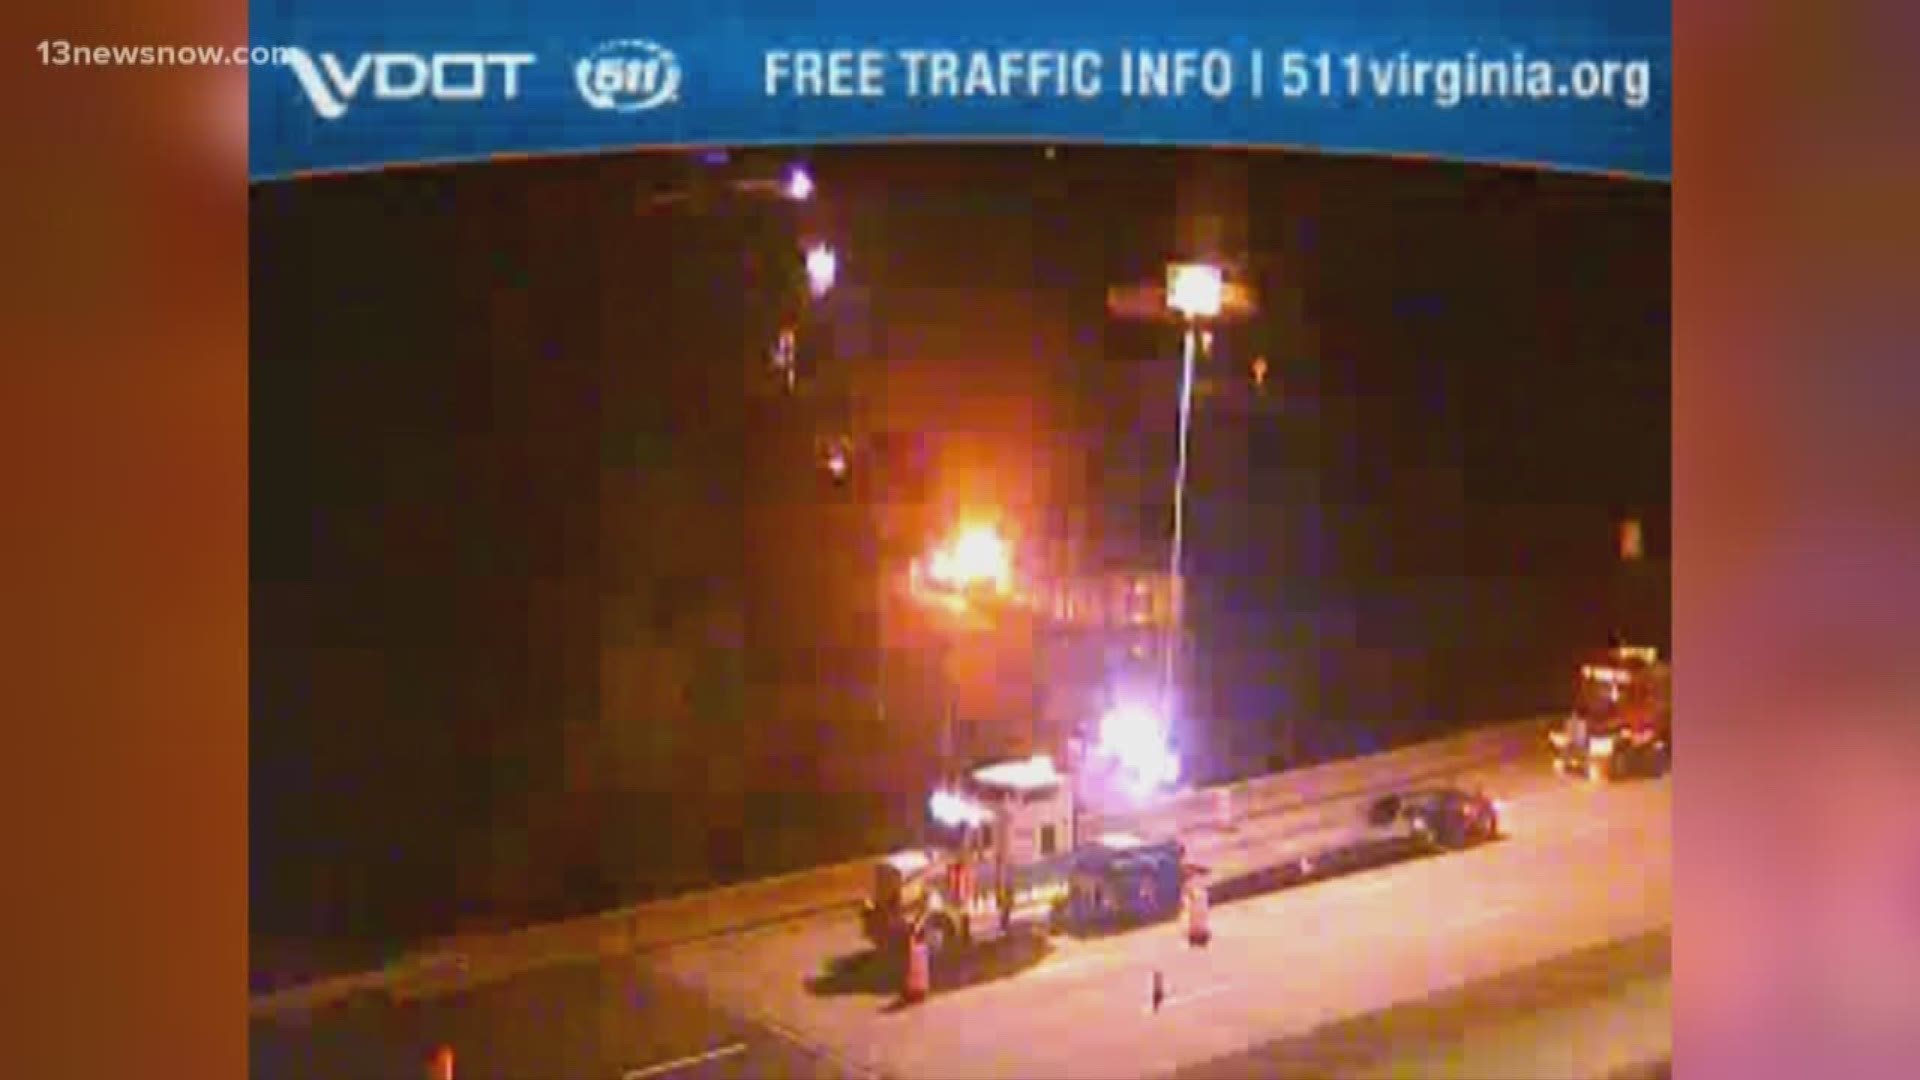 A VDOT employee was hurt in a crash in Chesapeake late Thursday night on I-664 near Bowers Hill.